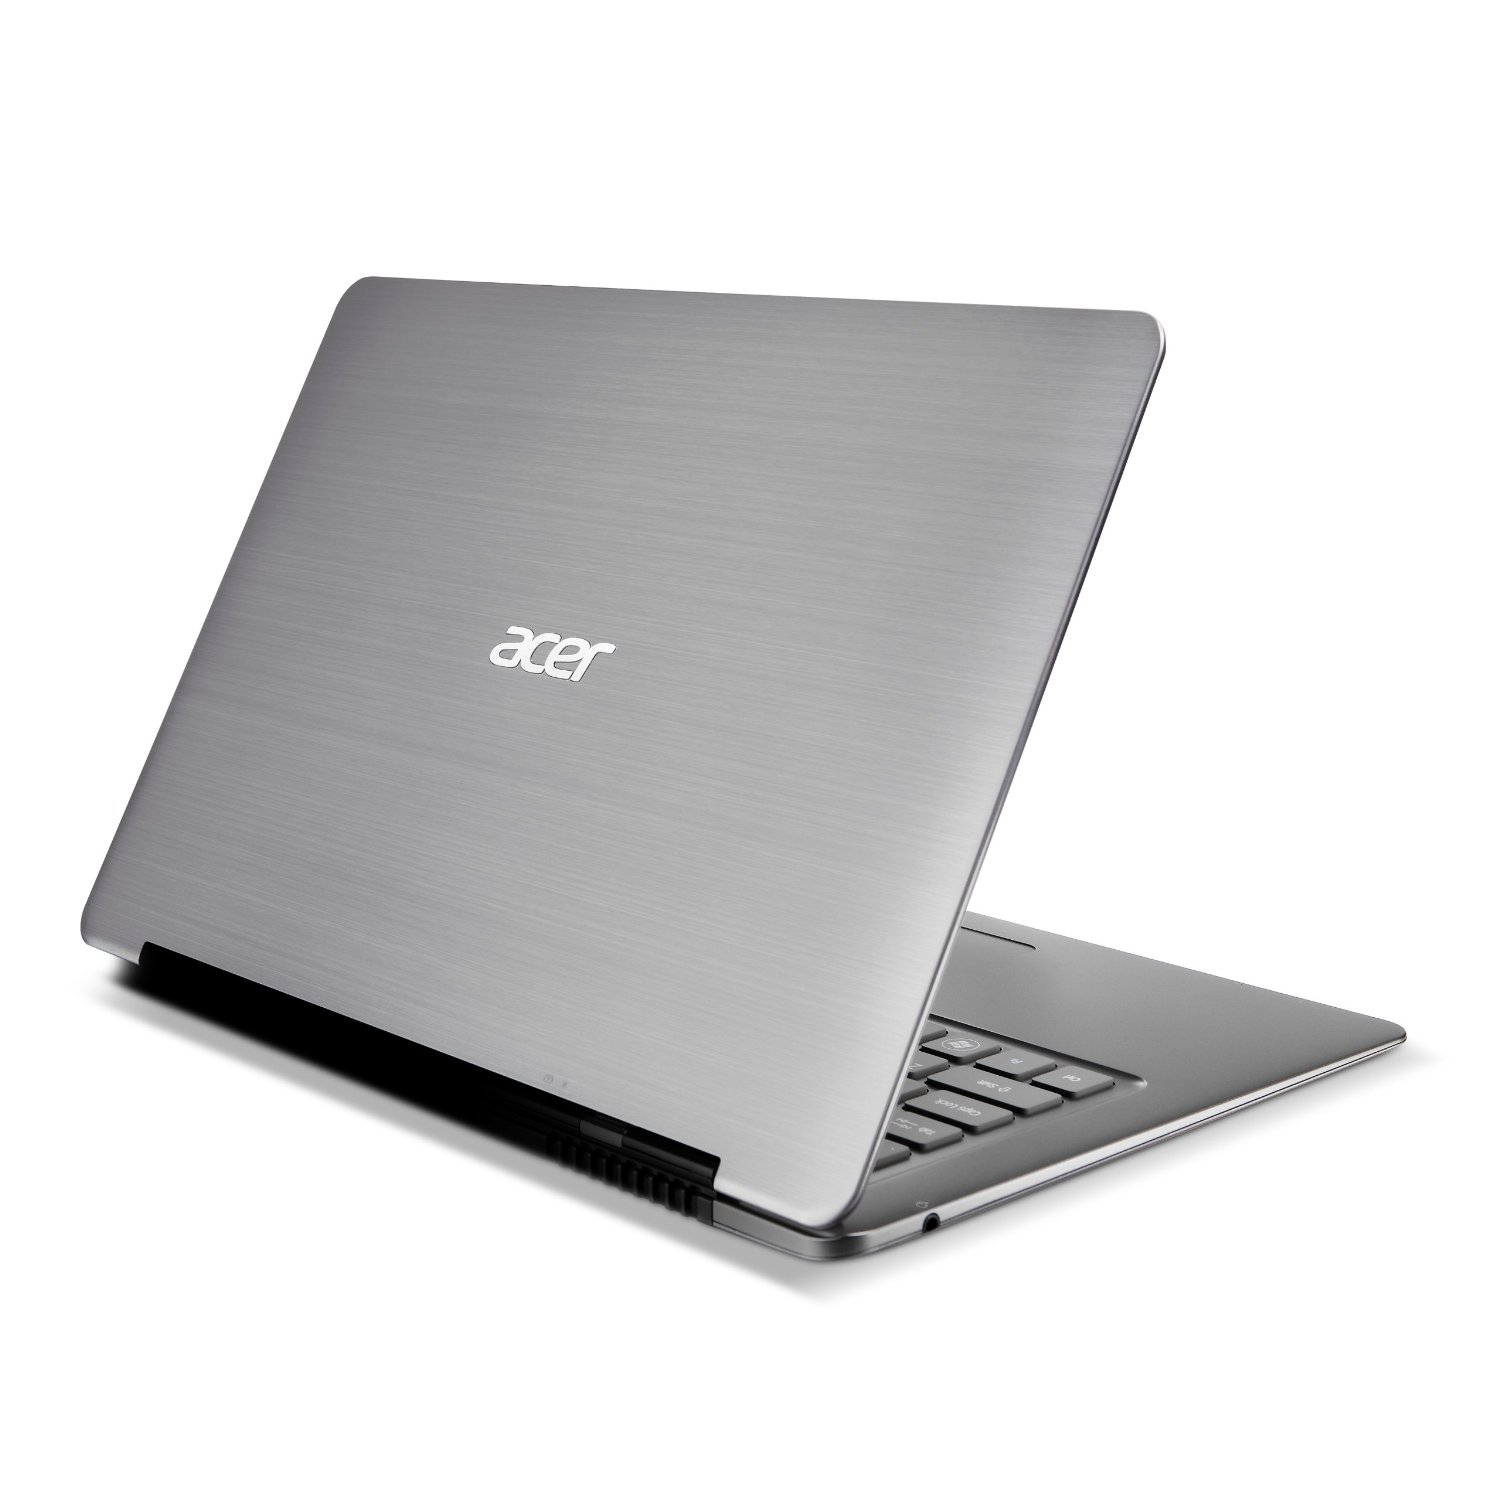 http://thetechjournal.com/wp-content/uploads/images/1110/1318646337-acer-aspire-s39516646-ultrabook-with-133inch-hd-display-6.jpg